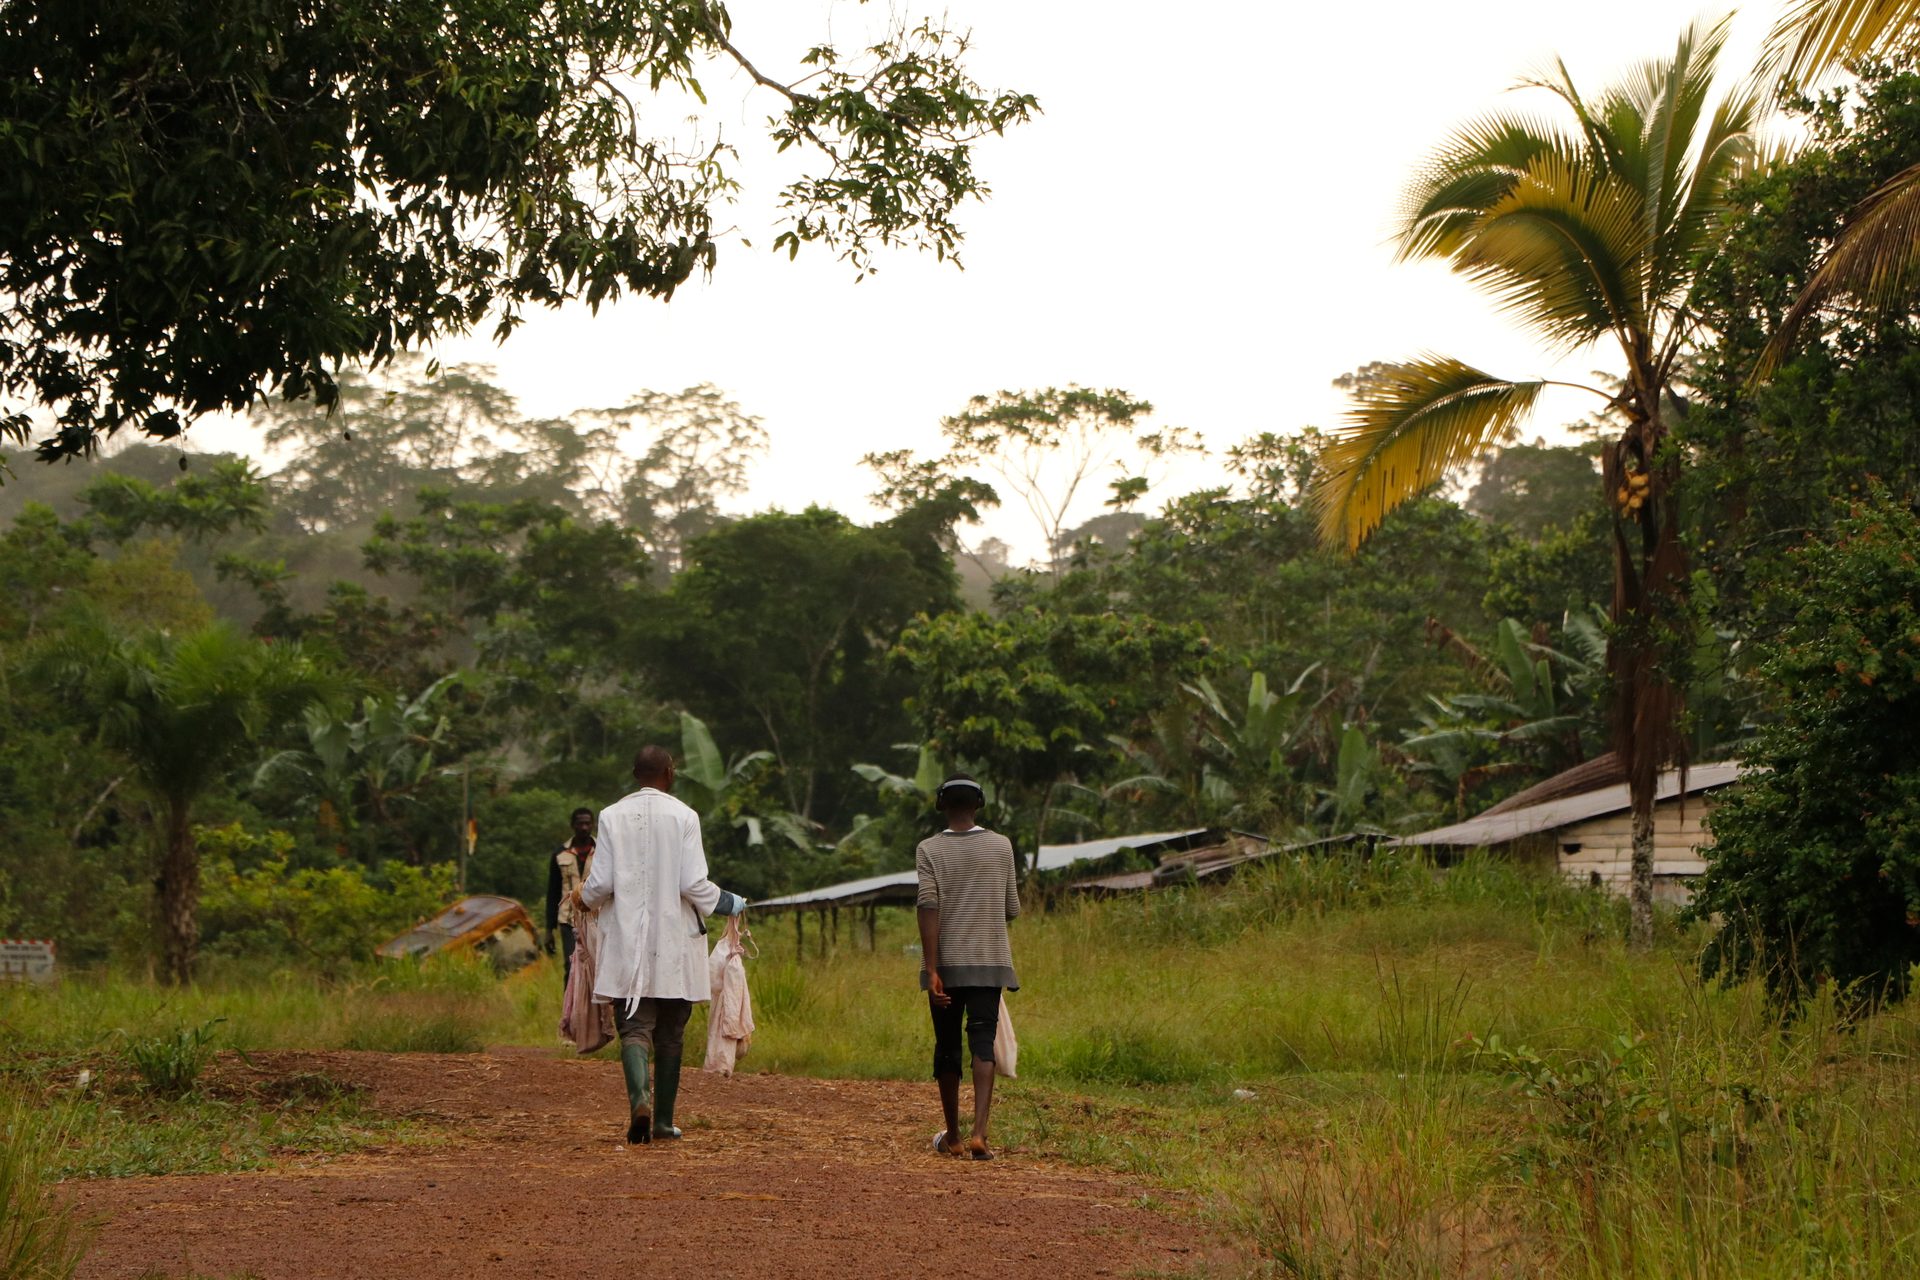 In Cameroon, communities live close to natural ecosystems home to wildlife. The EBO-SURSY Project is ensuring these communities know all safety measures to prevent zoonoses outbreaks.